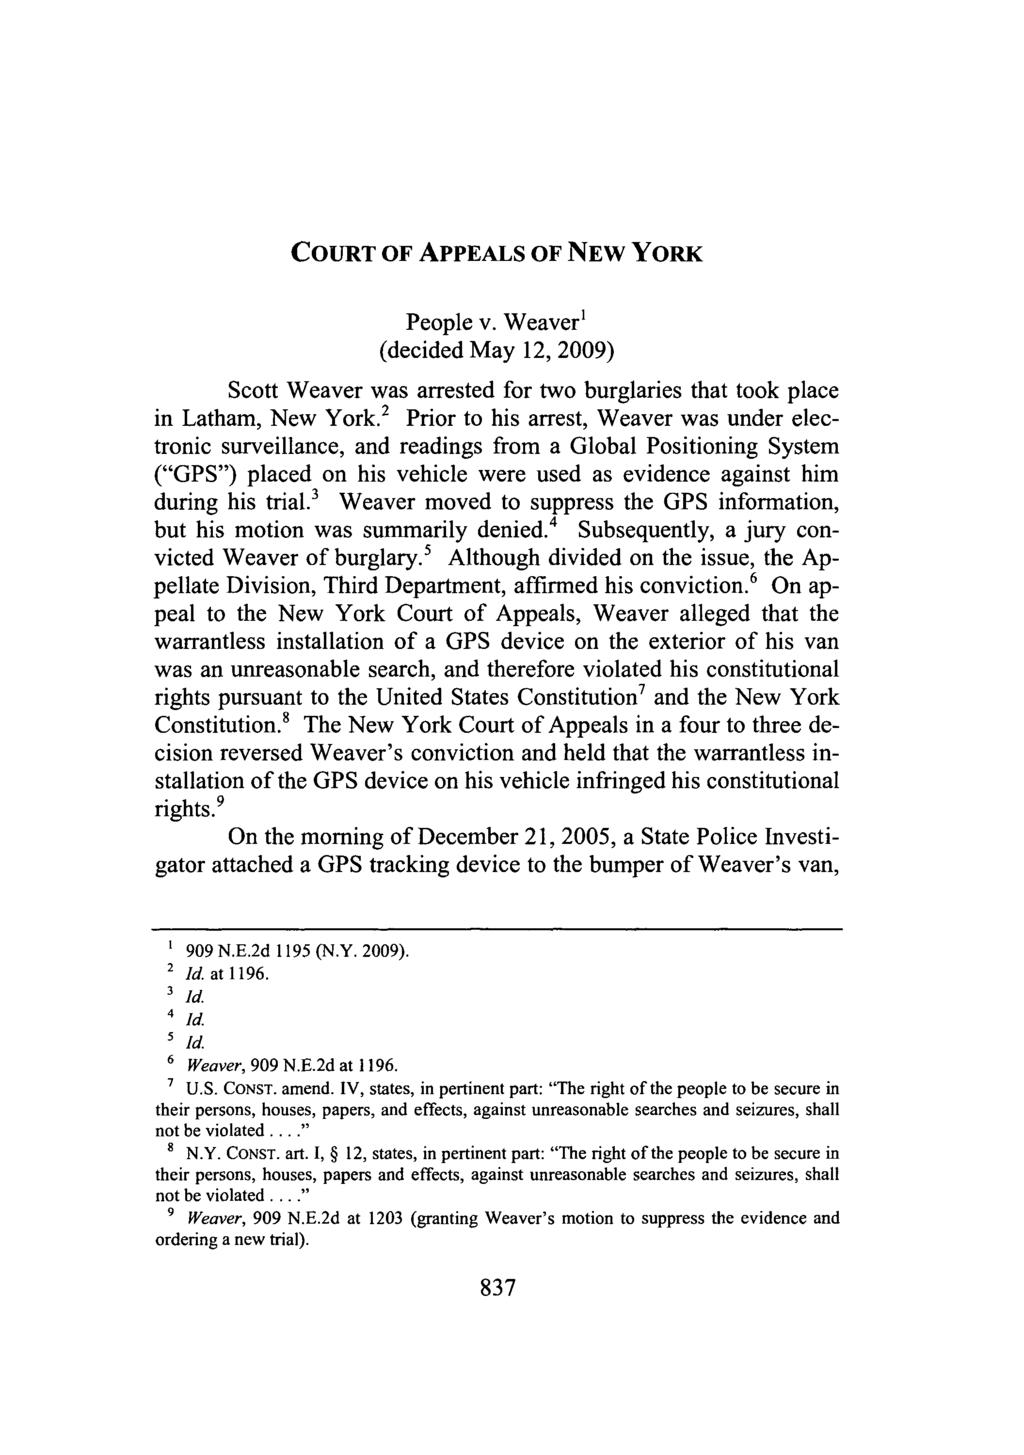 Kliegman: Court of Appeals of New York - People v. Weaver COURT OF APPEALS OF NEW YORK People v.